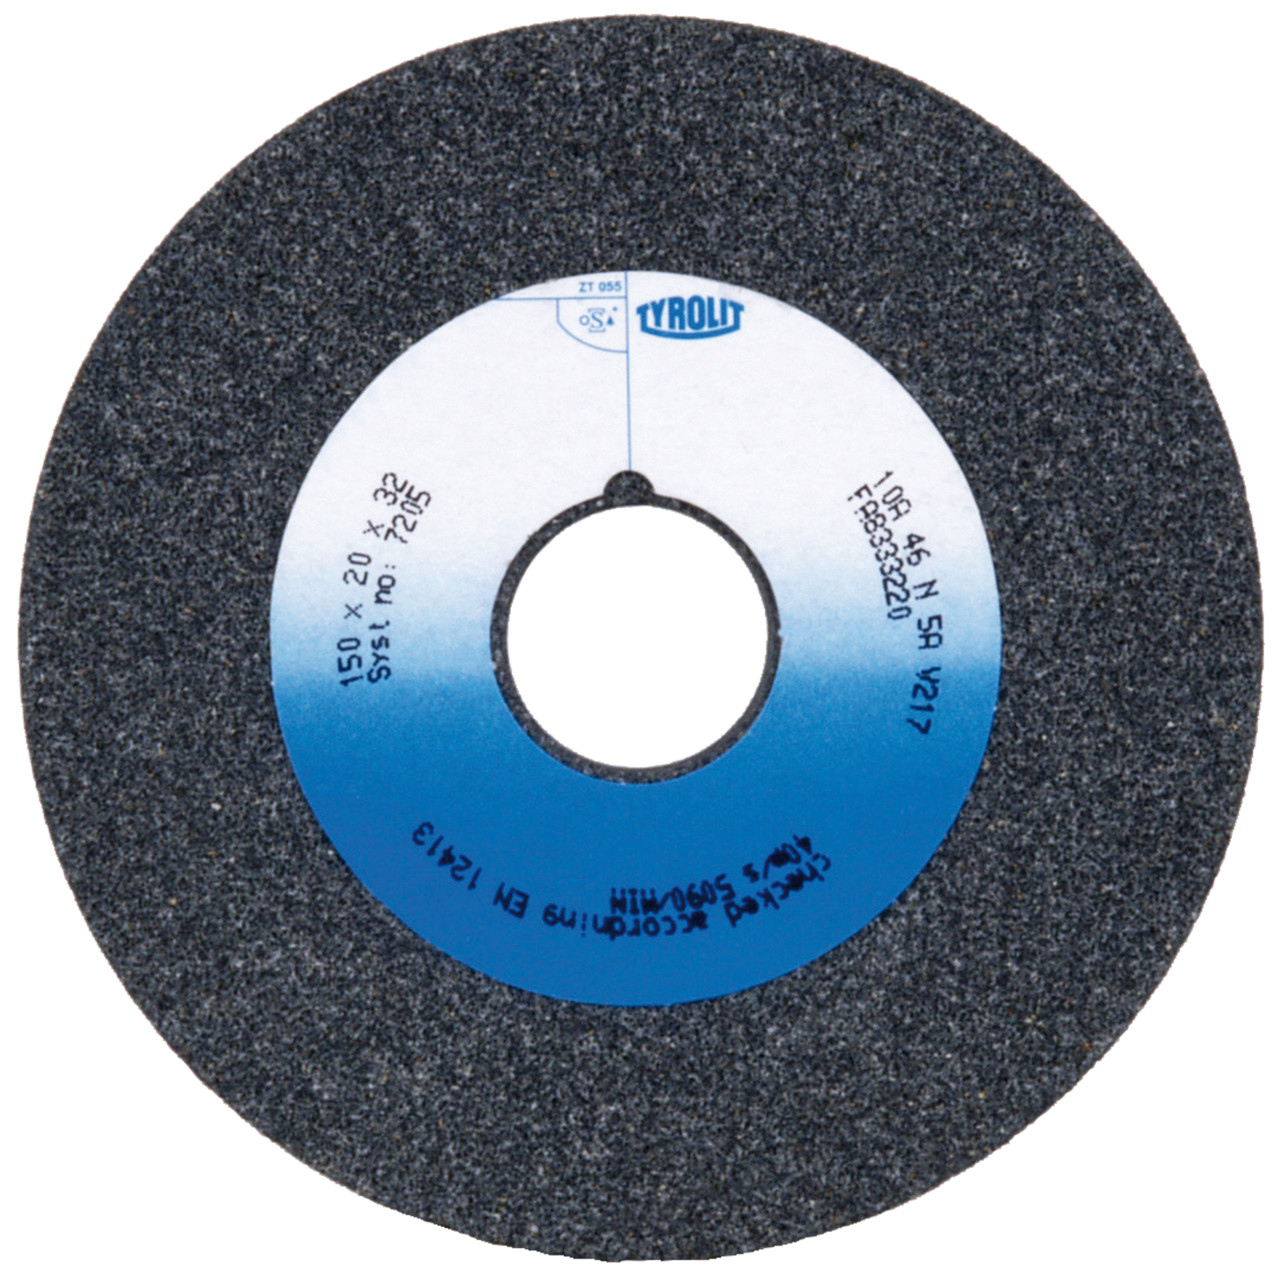 Tyrolit Conventional ceramic grinding discs DxDxH 200x32x51 For unalloyed and low-alloy steels, shape: 1, Art. 664256